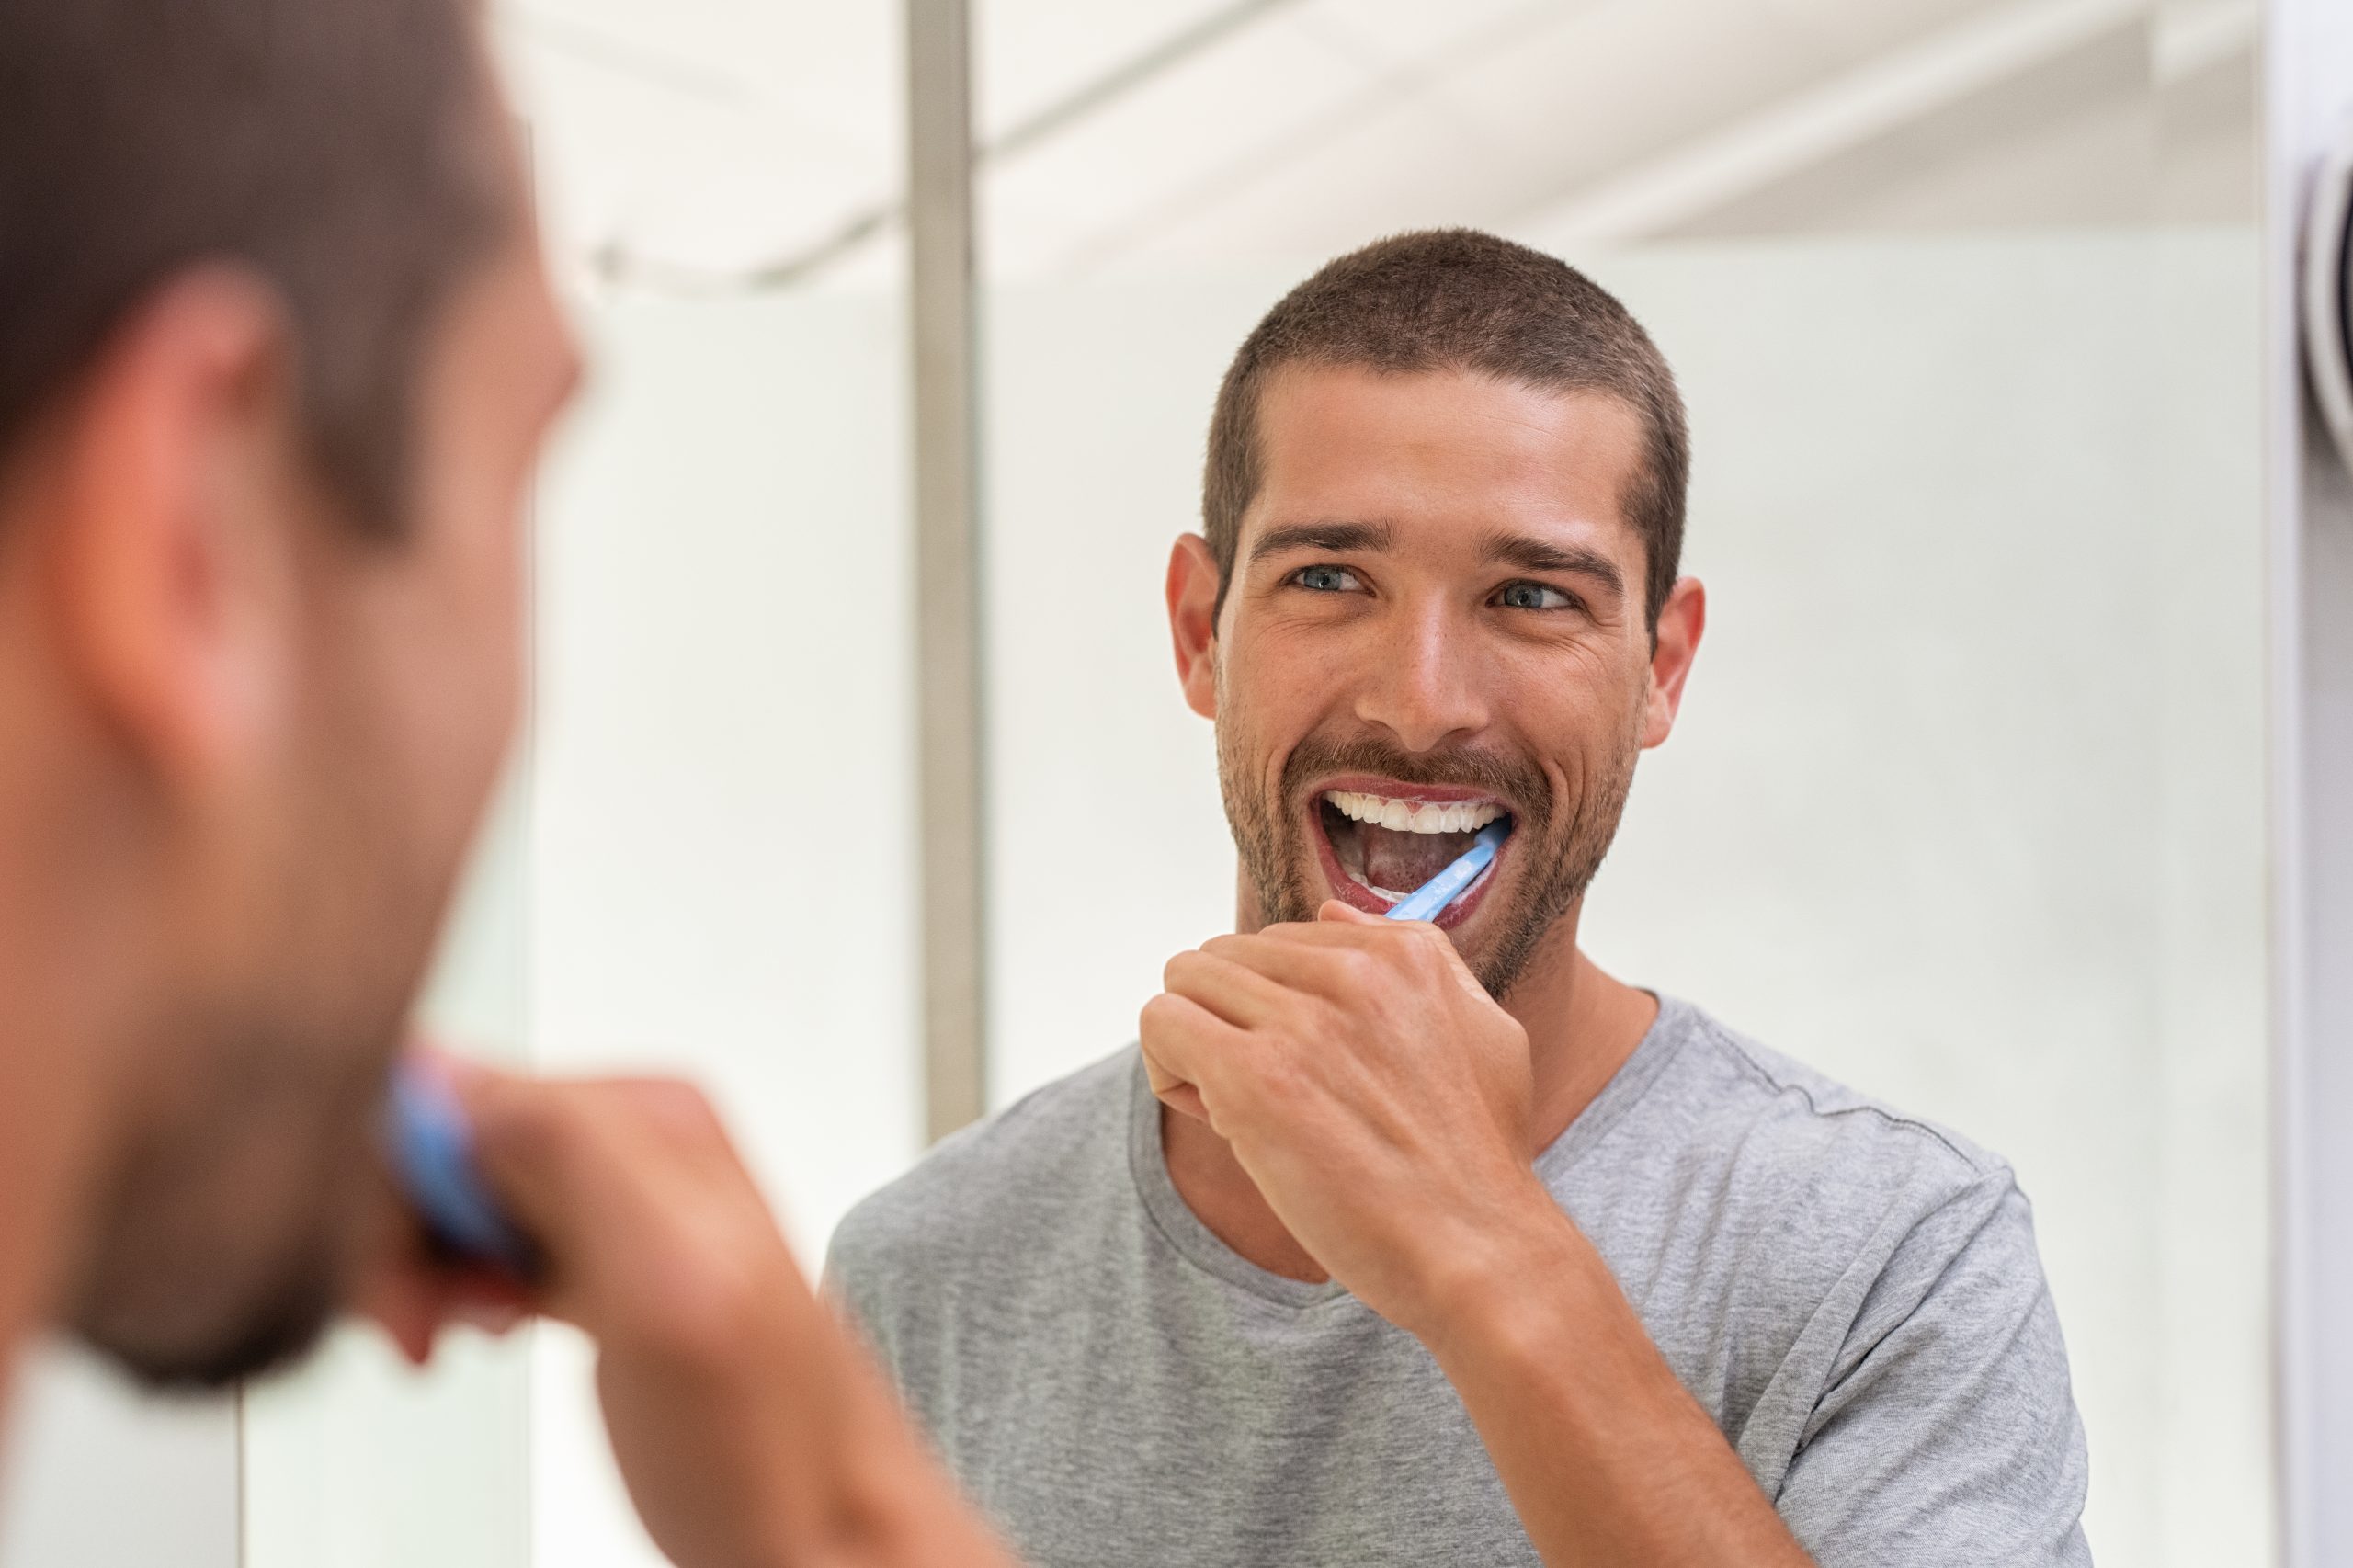 Options for Teeth Whitening That Are Widely Accepted